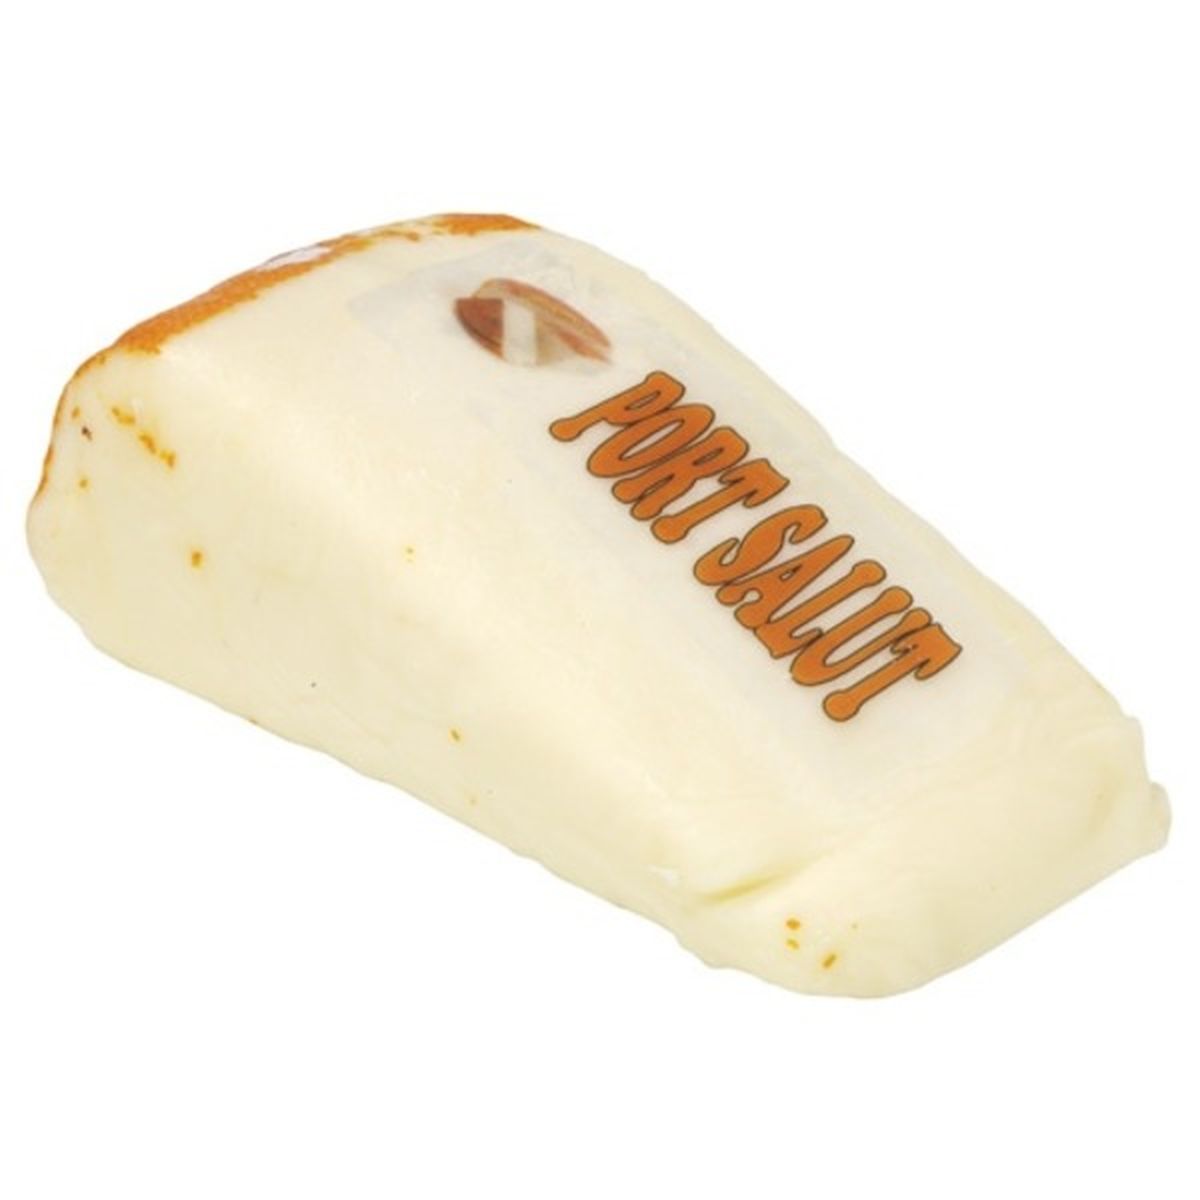 Calories in Port Salut Cheese